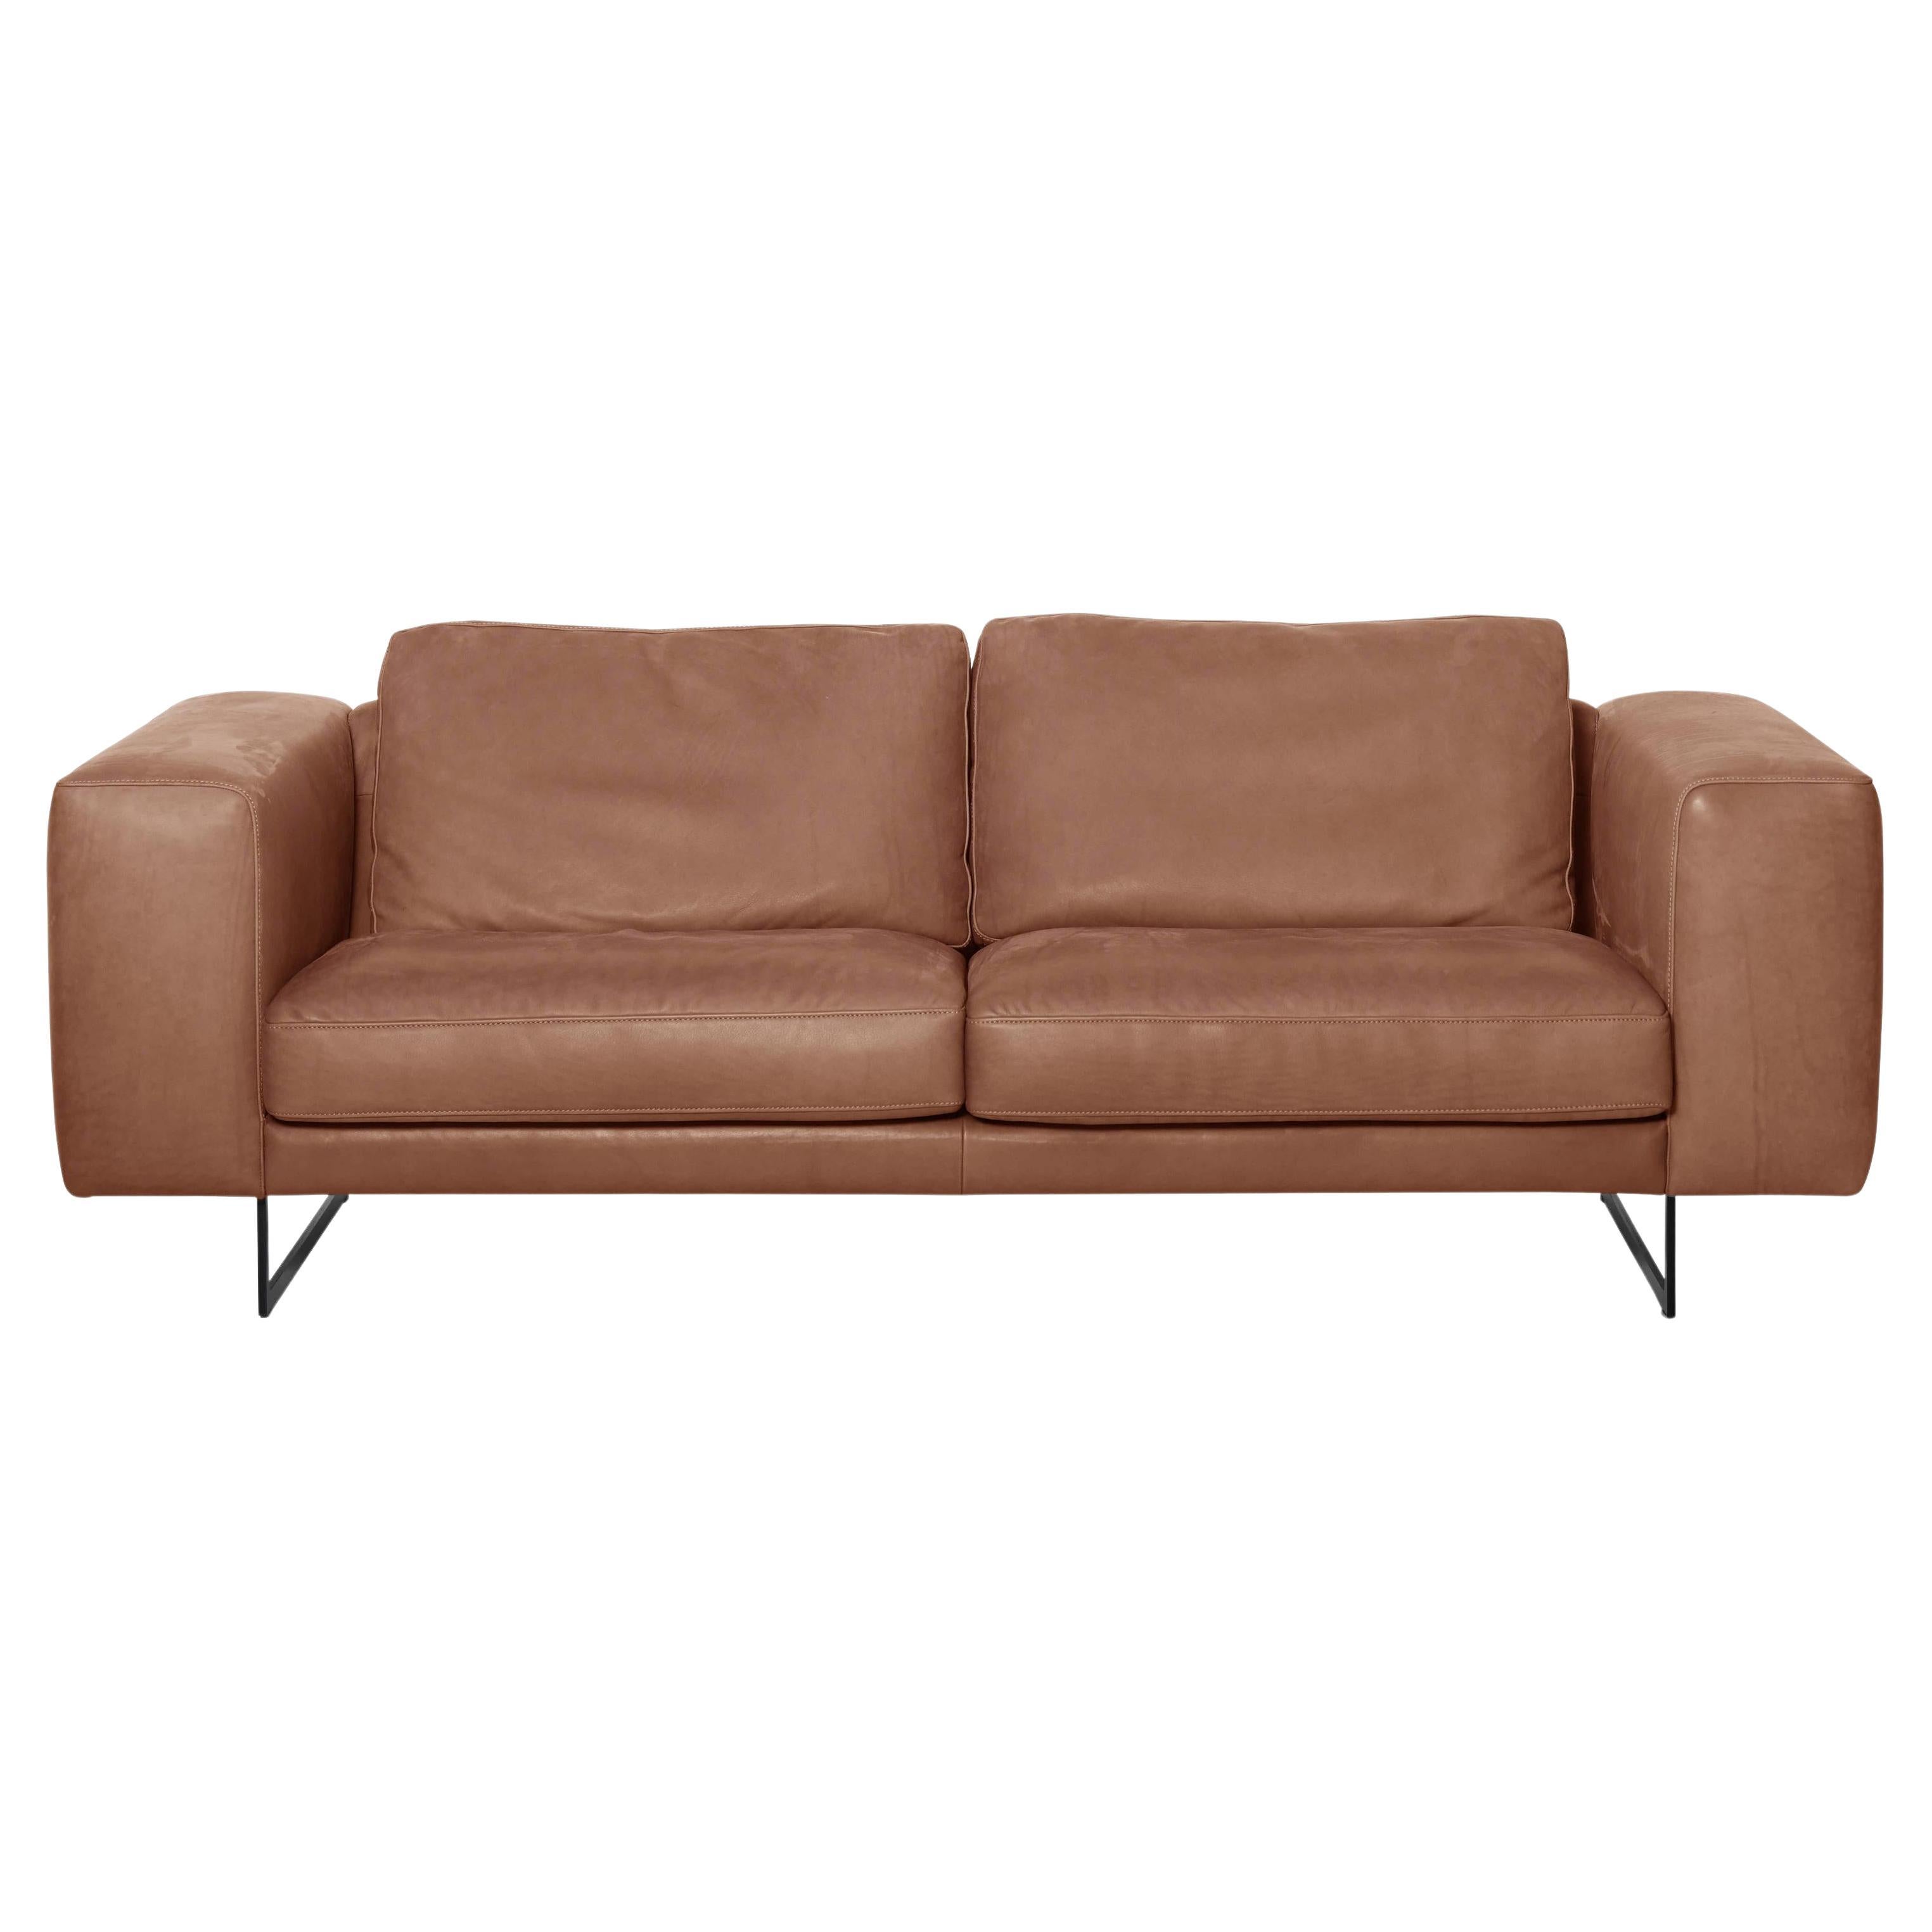 De Sede DS-748 Medium Two-Seat Sofa in Nougat Upholstery by Claudio Bellini For Sale